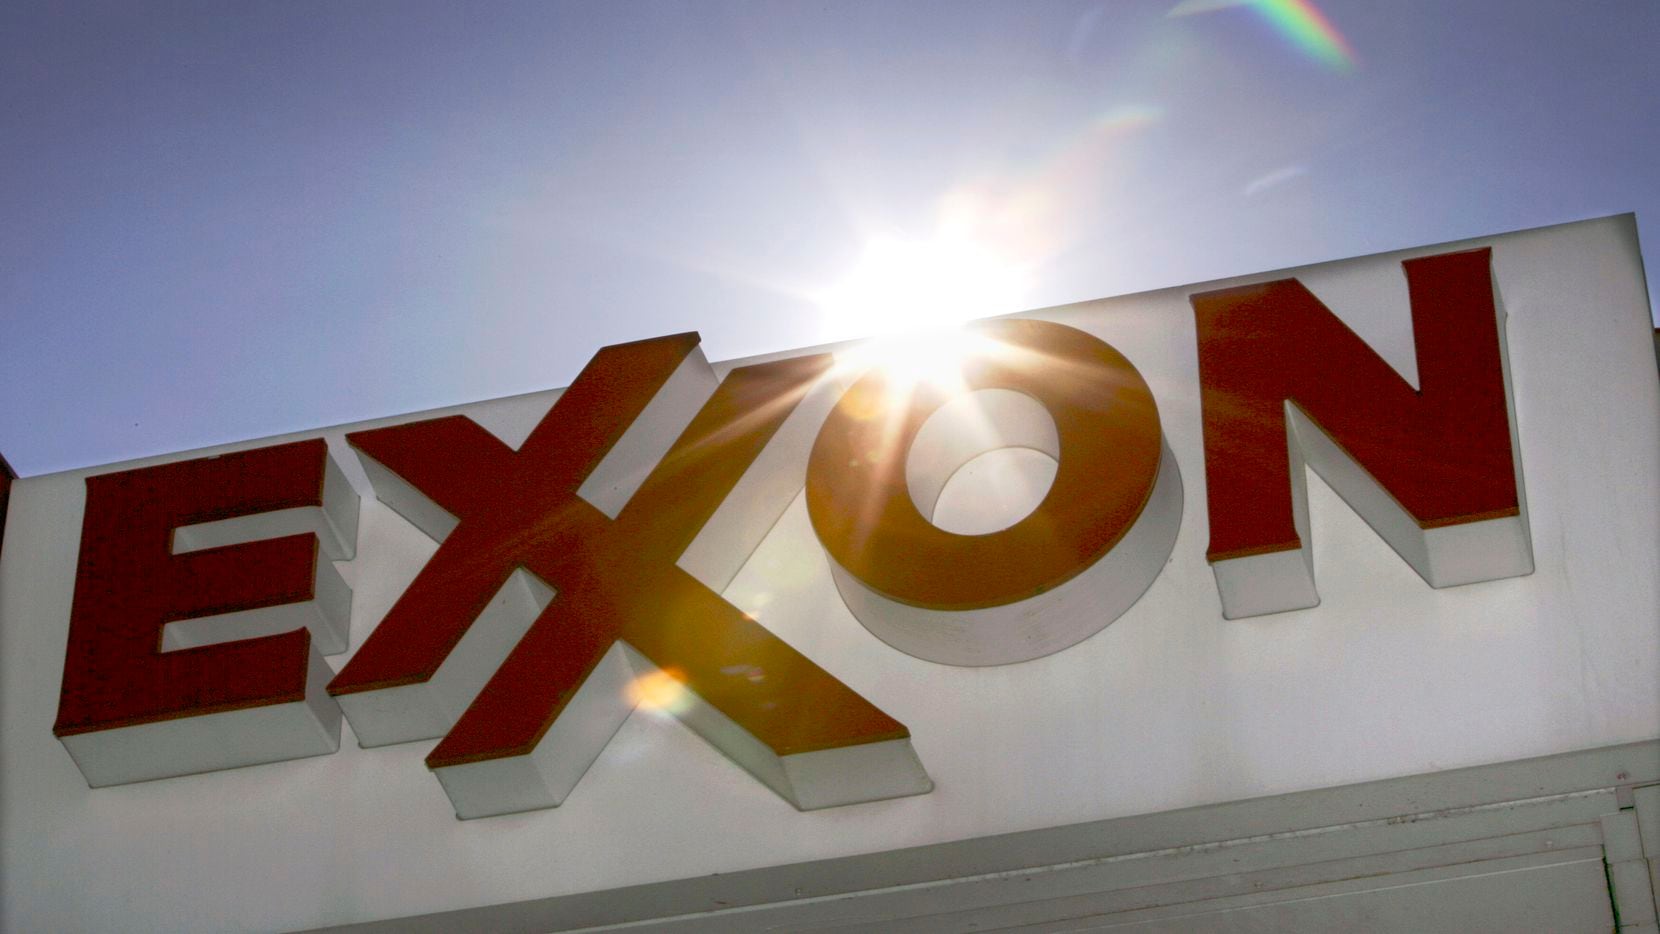 Bigger questions still loom over Exxon’s fossil fuel-focused strategy, especially after...